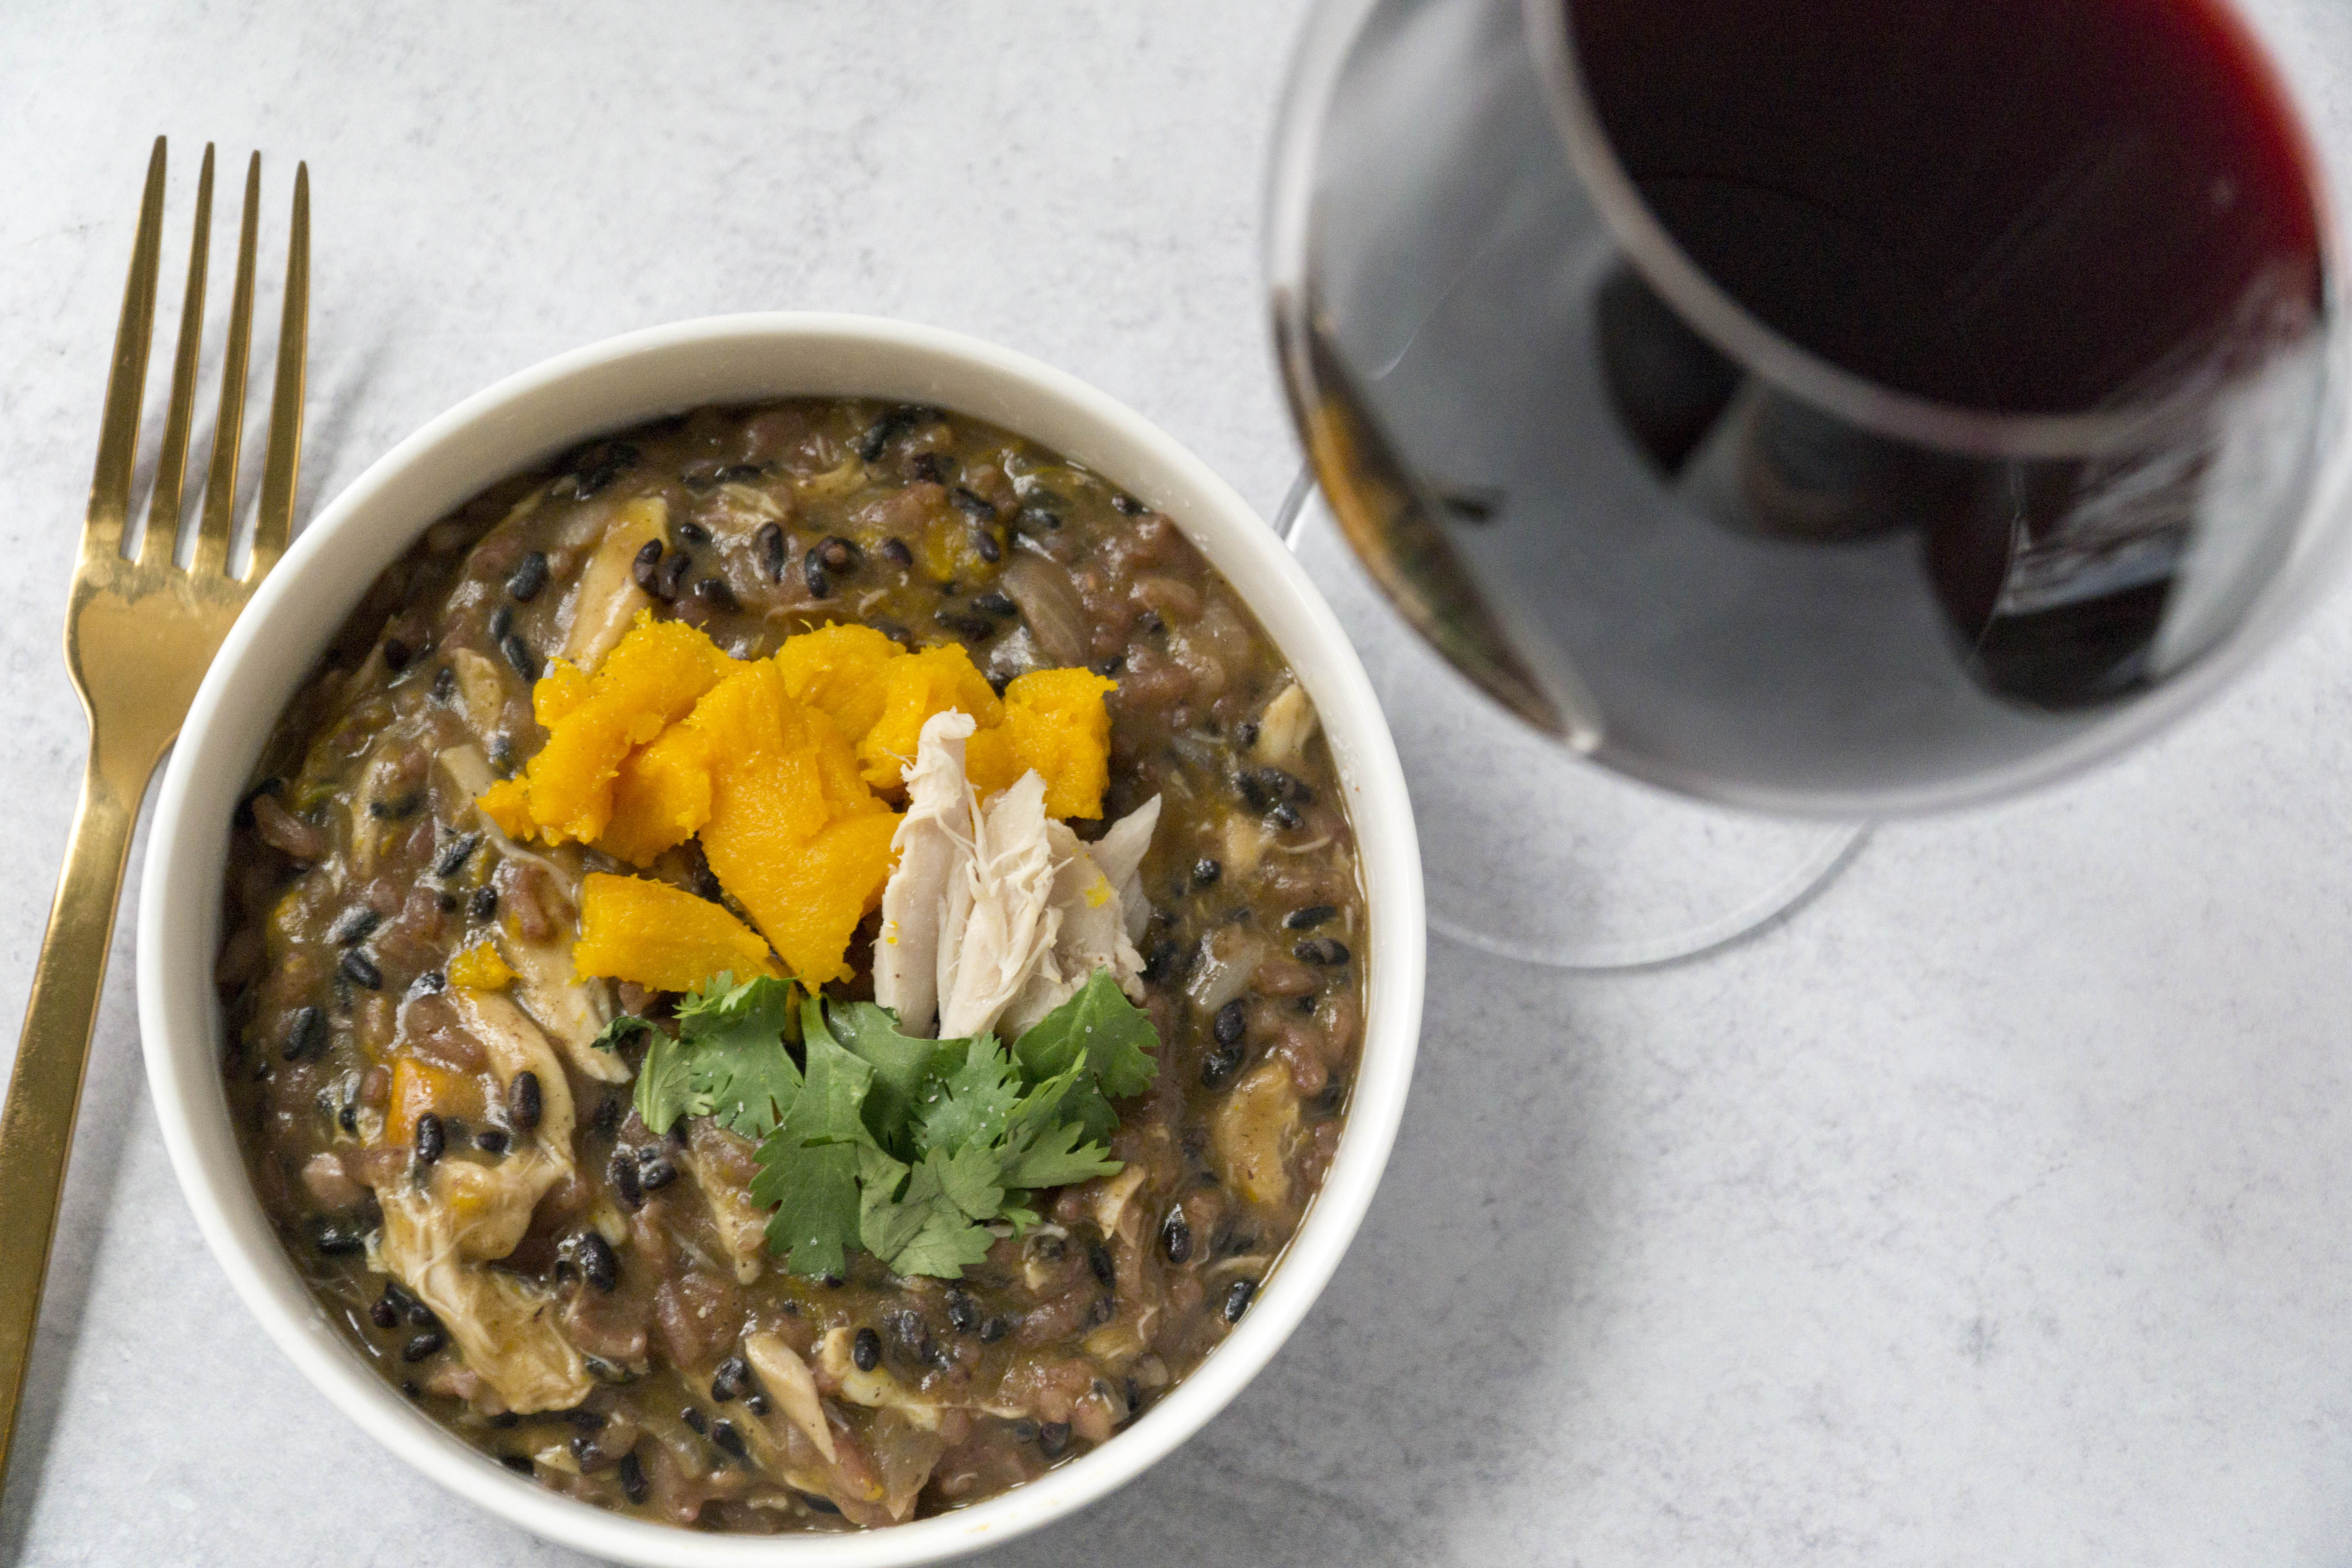 pumpkin black rice risotto (10) with red wine and golden fork